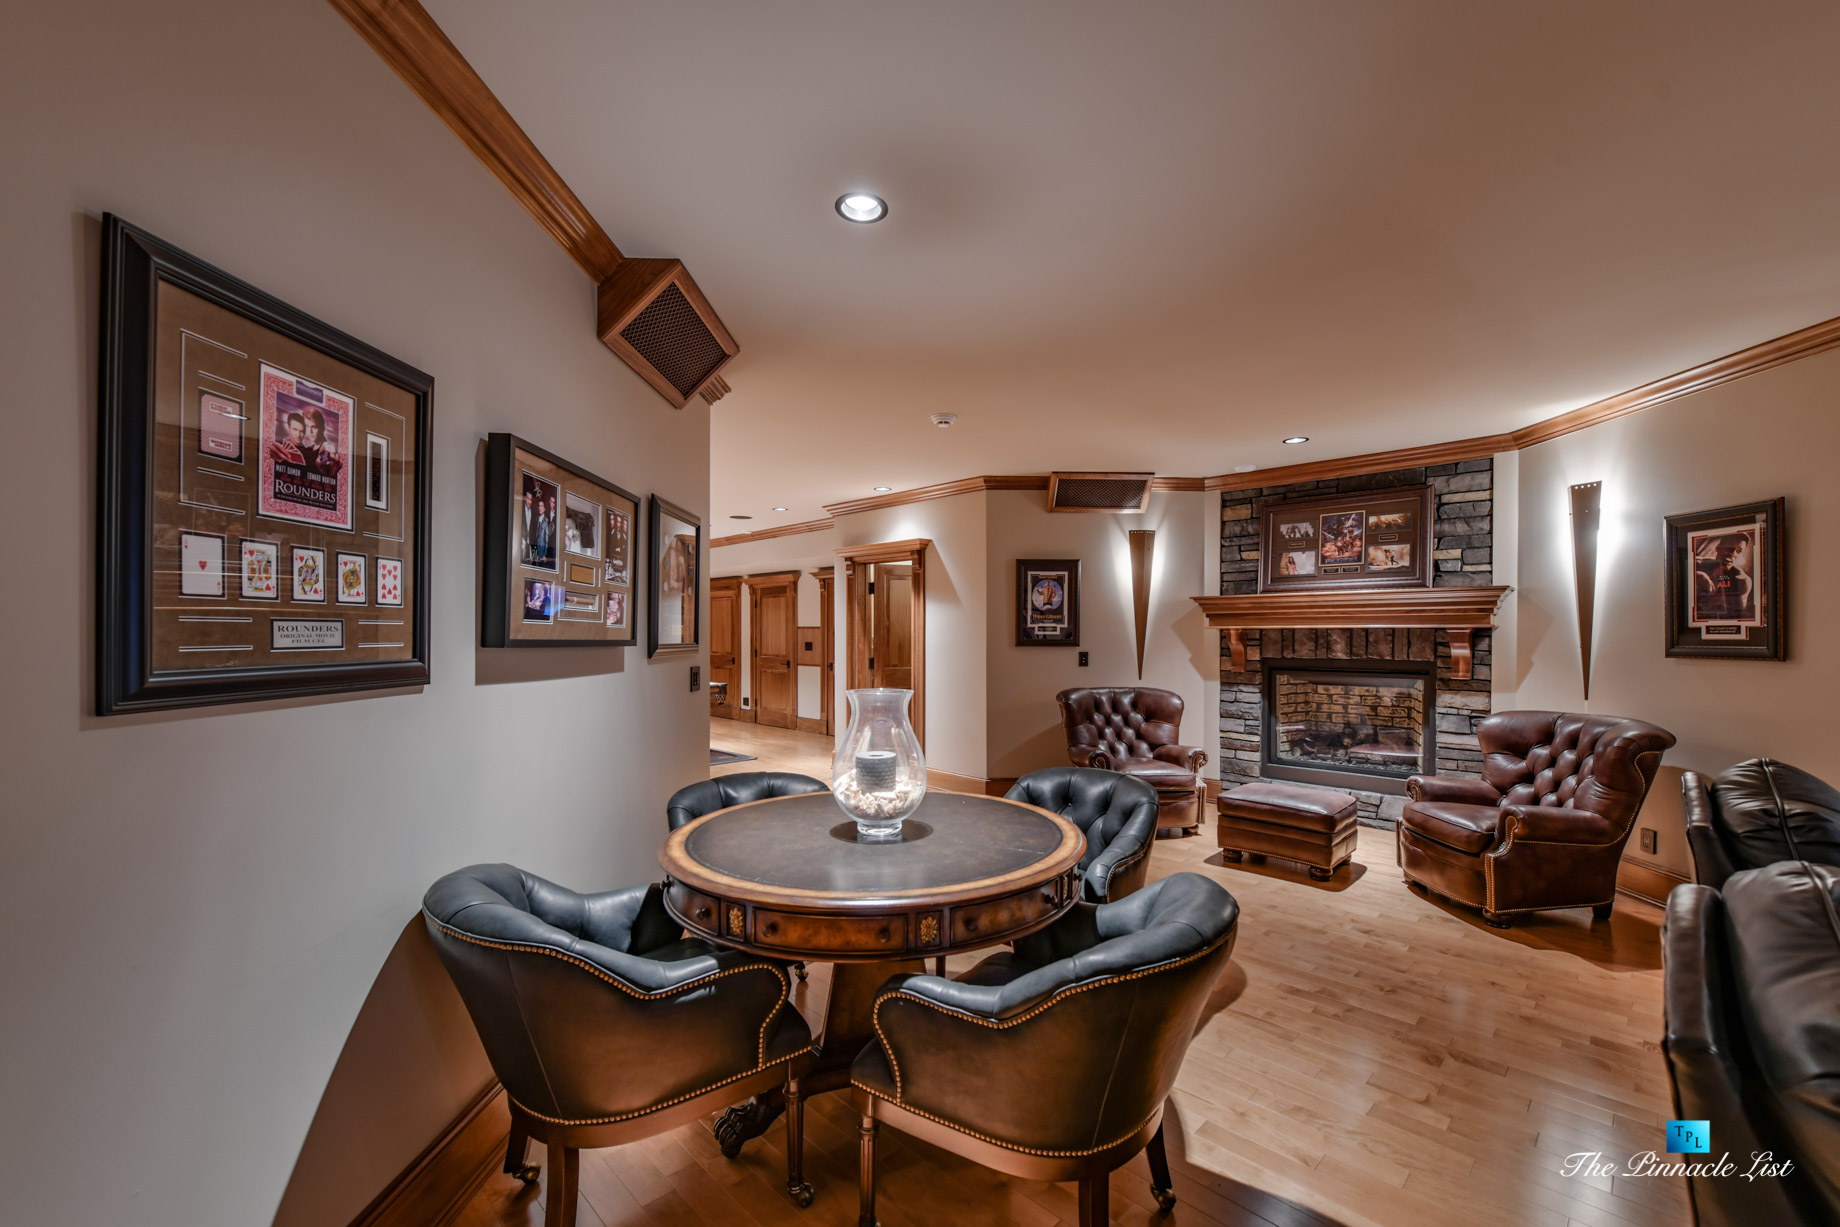 3053 Anmore Creek Way, Anmore, BC, Canada - Basement Man Cave Poker Table Fireplace and Lounge Chairs - Luxury Real Estate - Greater Vancouver Home